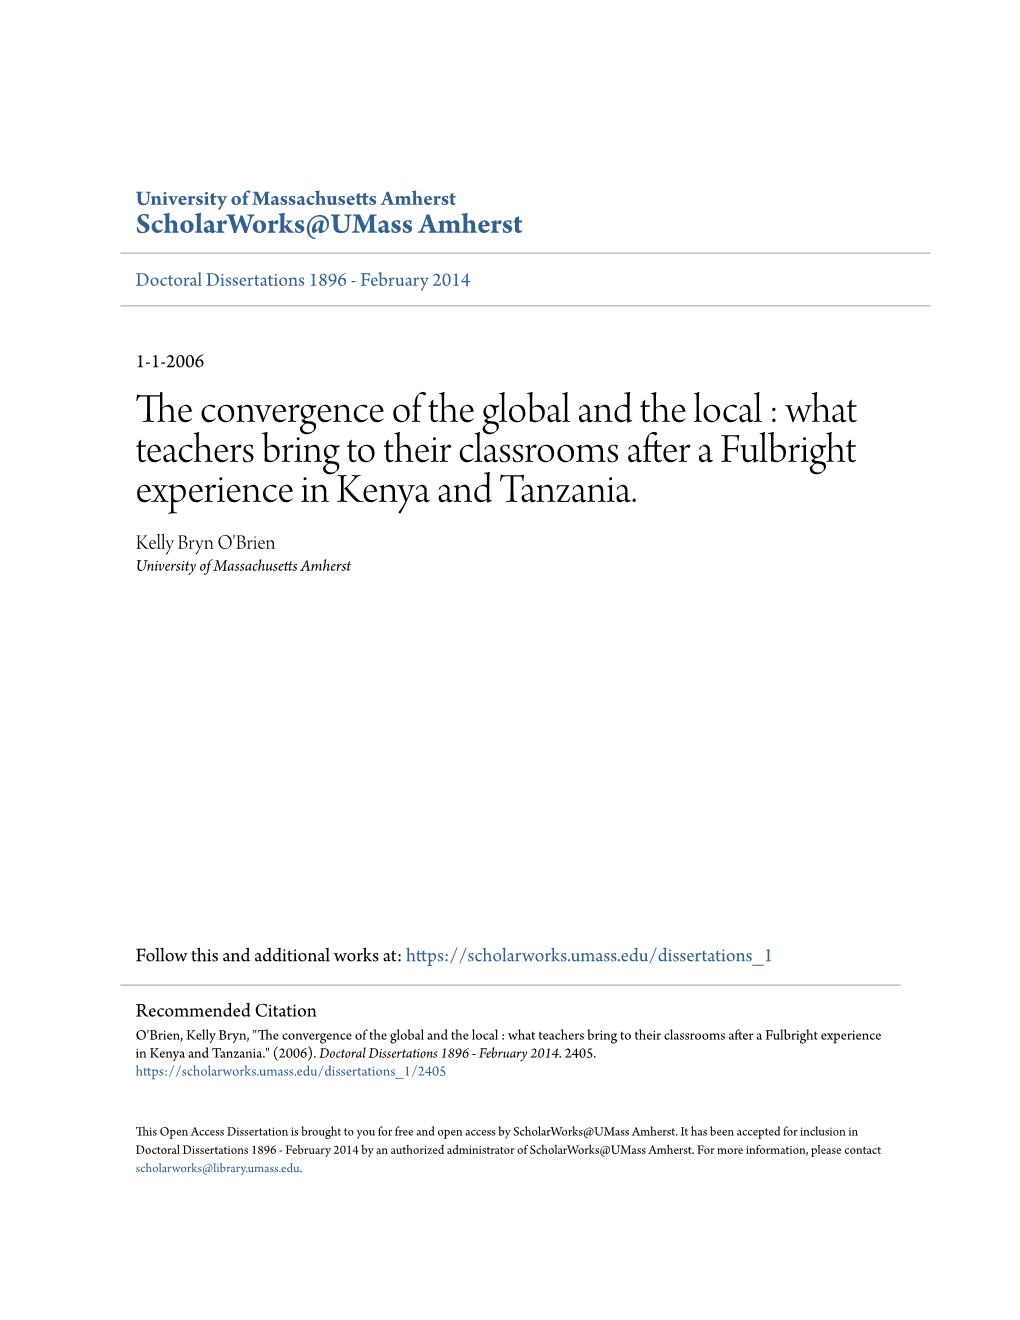 What Teachers Bring to Their Classrooms After a Fulbright Experience in Kenya and Tanzania